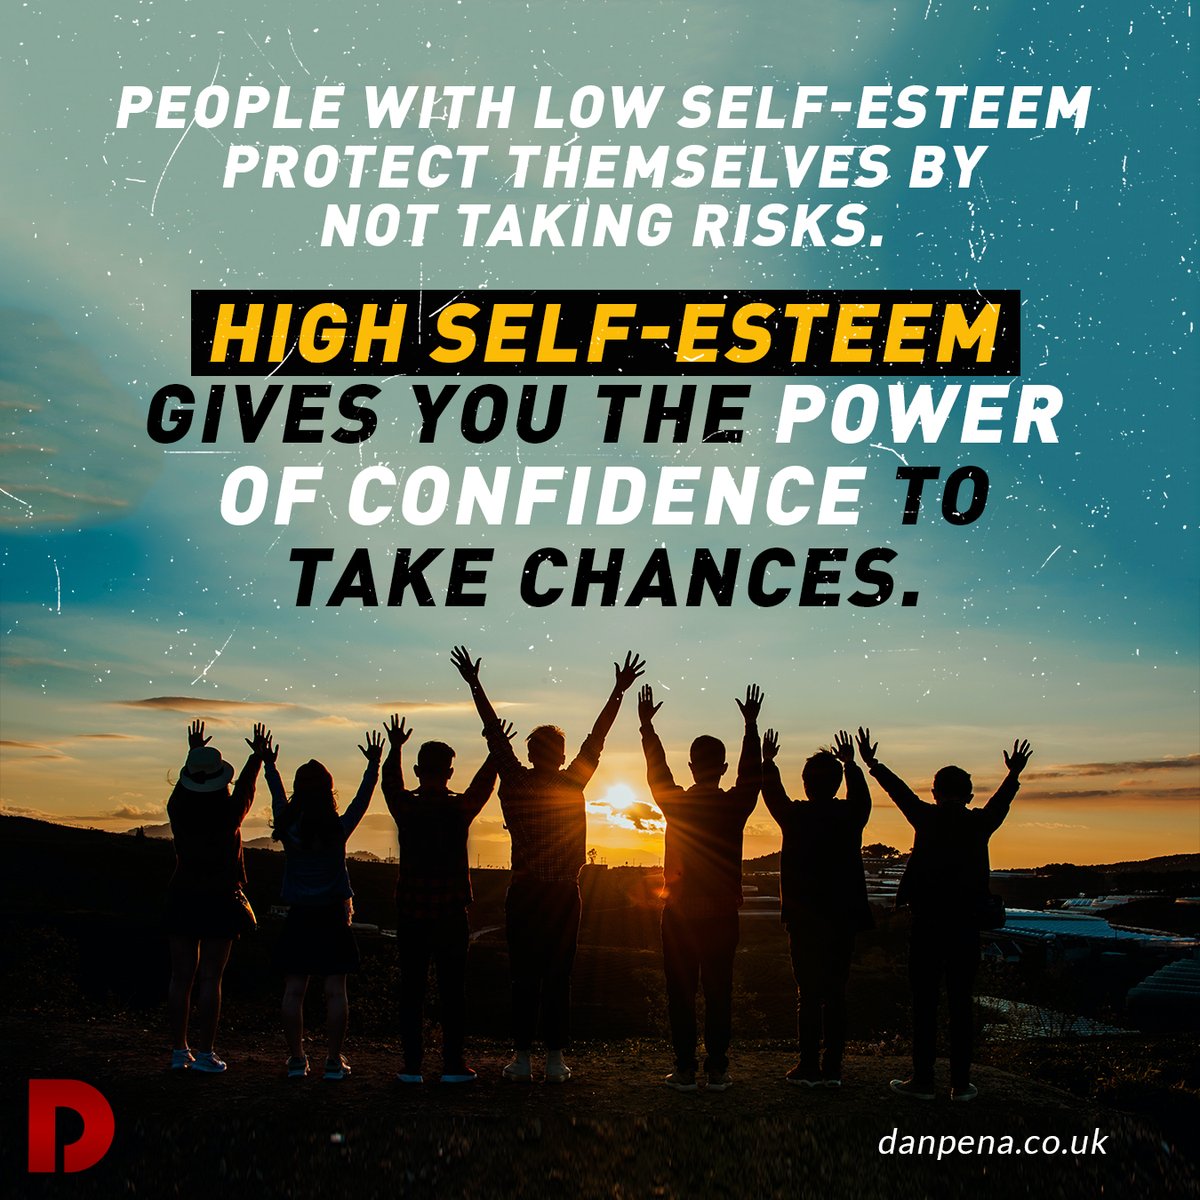 People with low self-esteem protect themselves by not taking risks. High self-esteem gives you the power of confidence to take chances. #penaism #danpena #qla